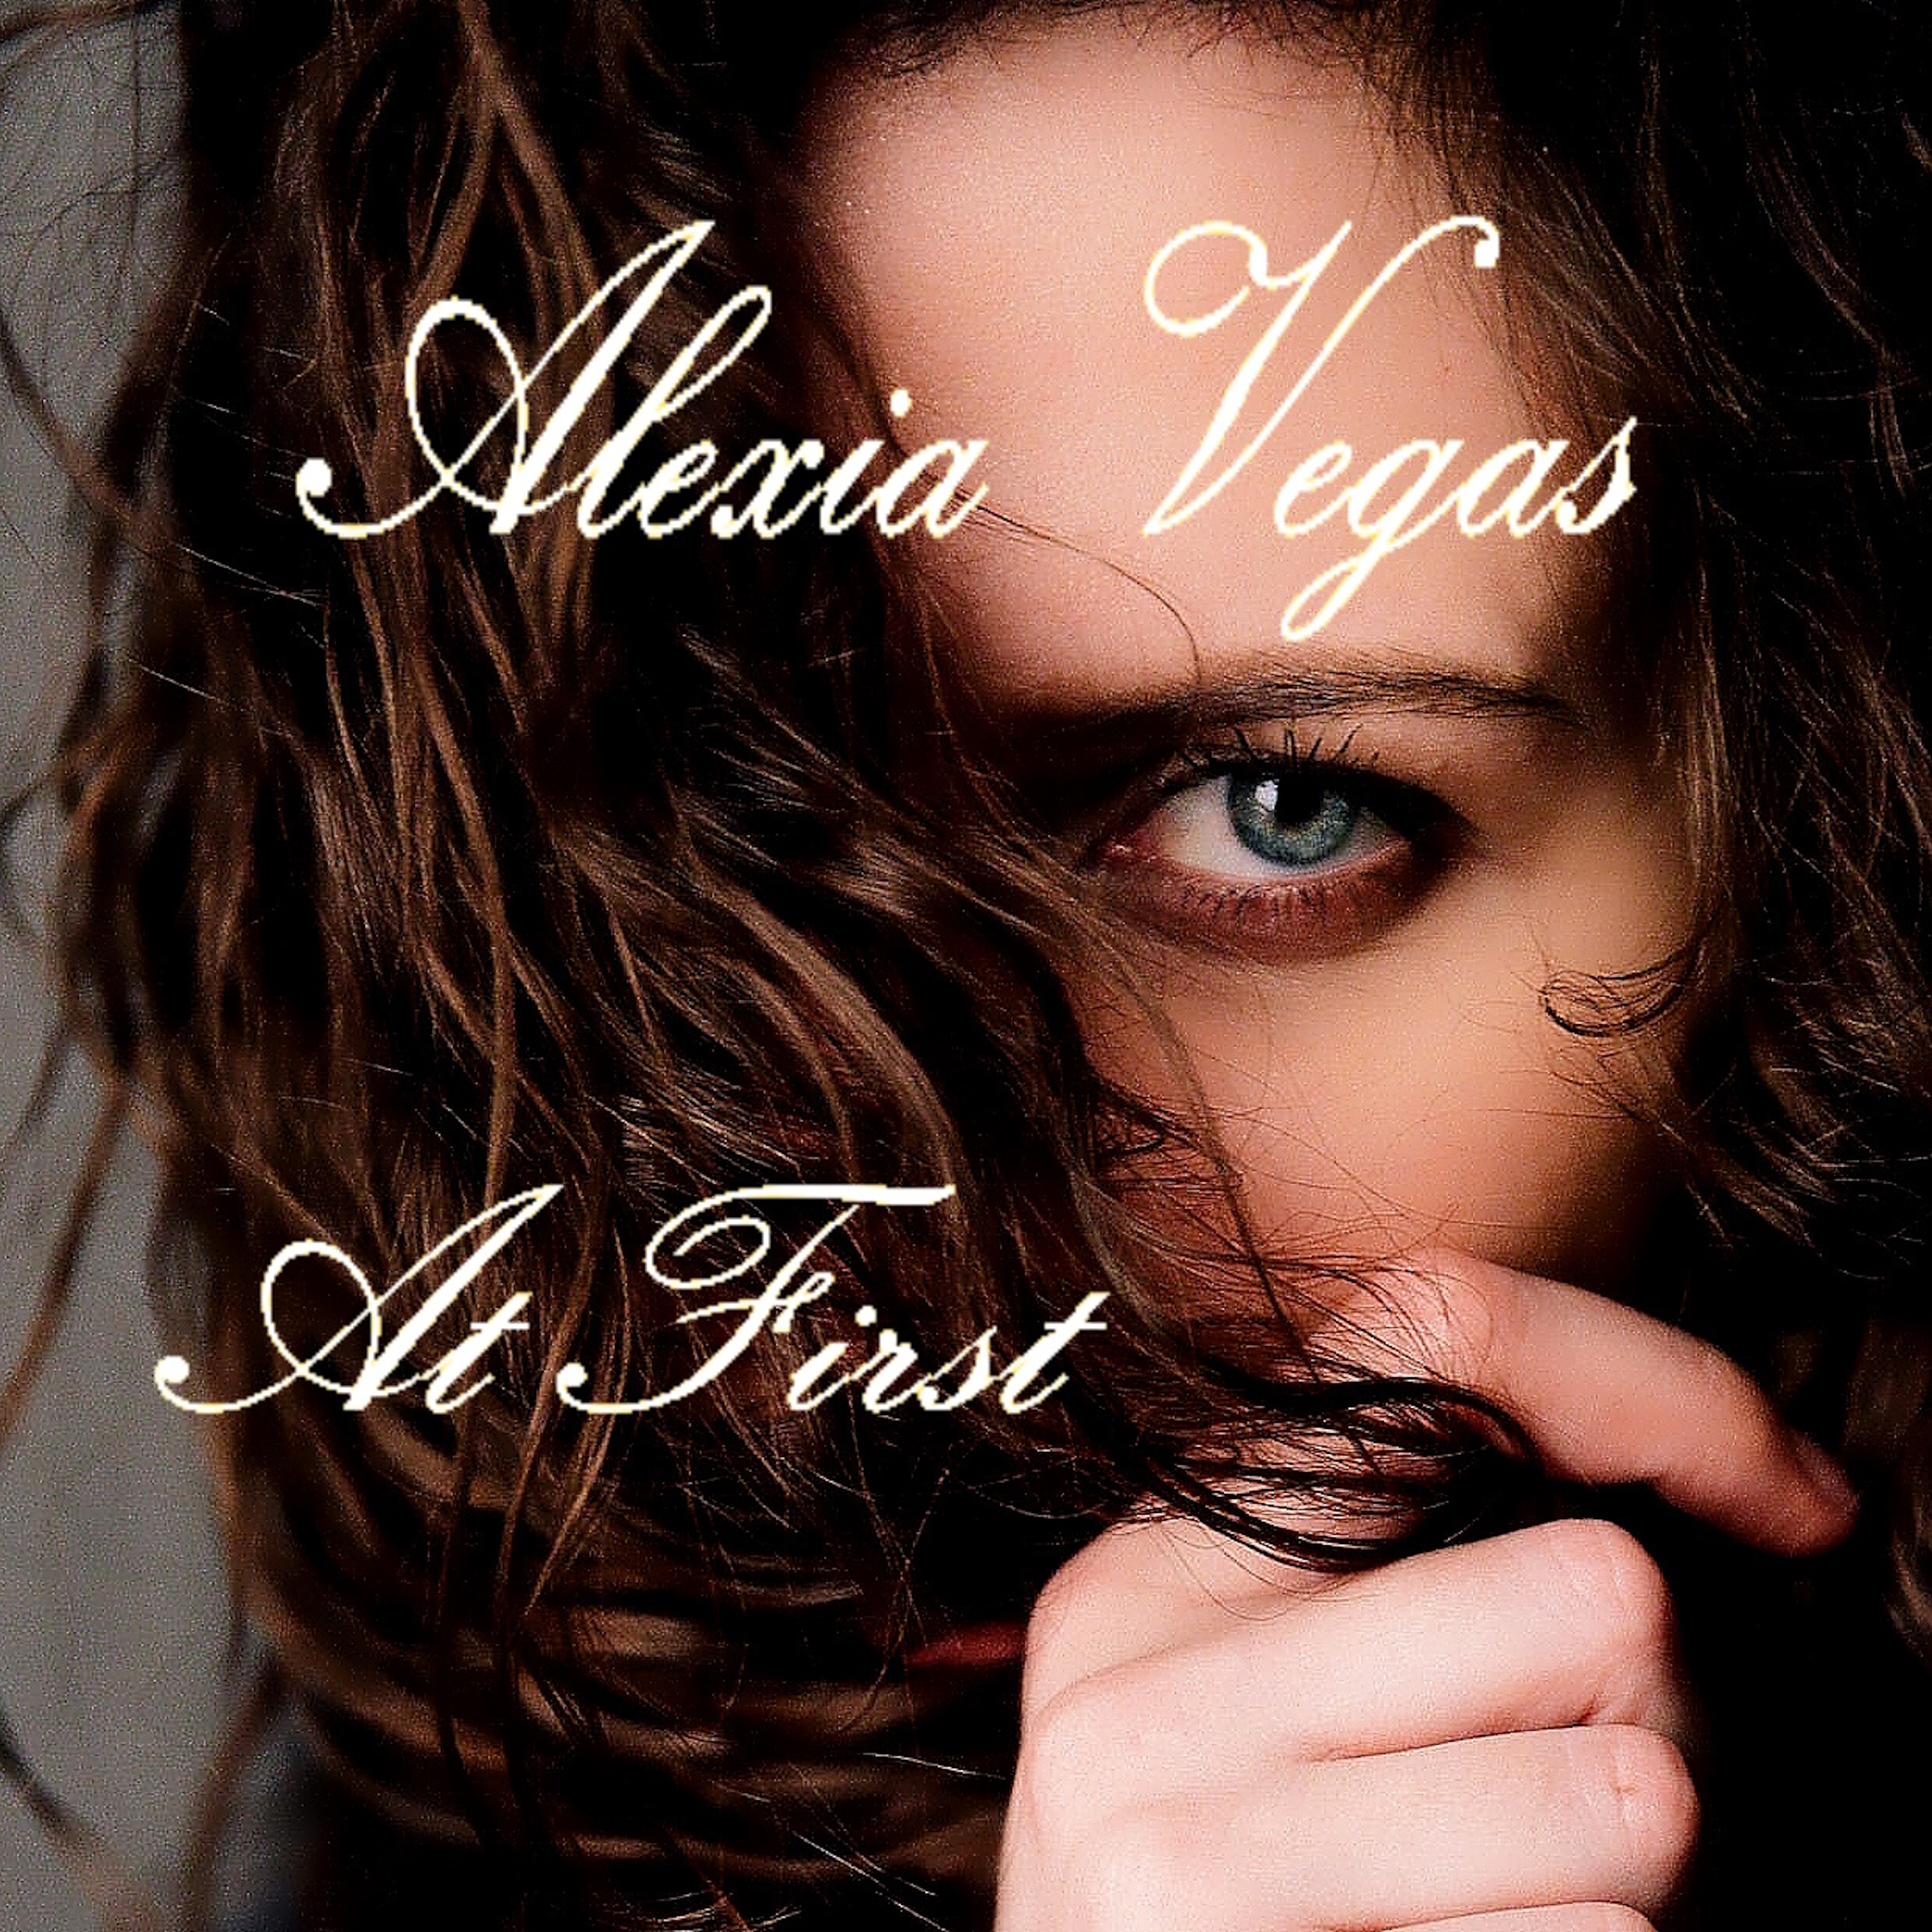 Alexia Vegas Releases New Single “At First” from Debut Album “Clear Blue Sky”